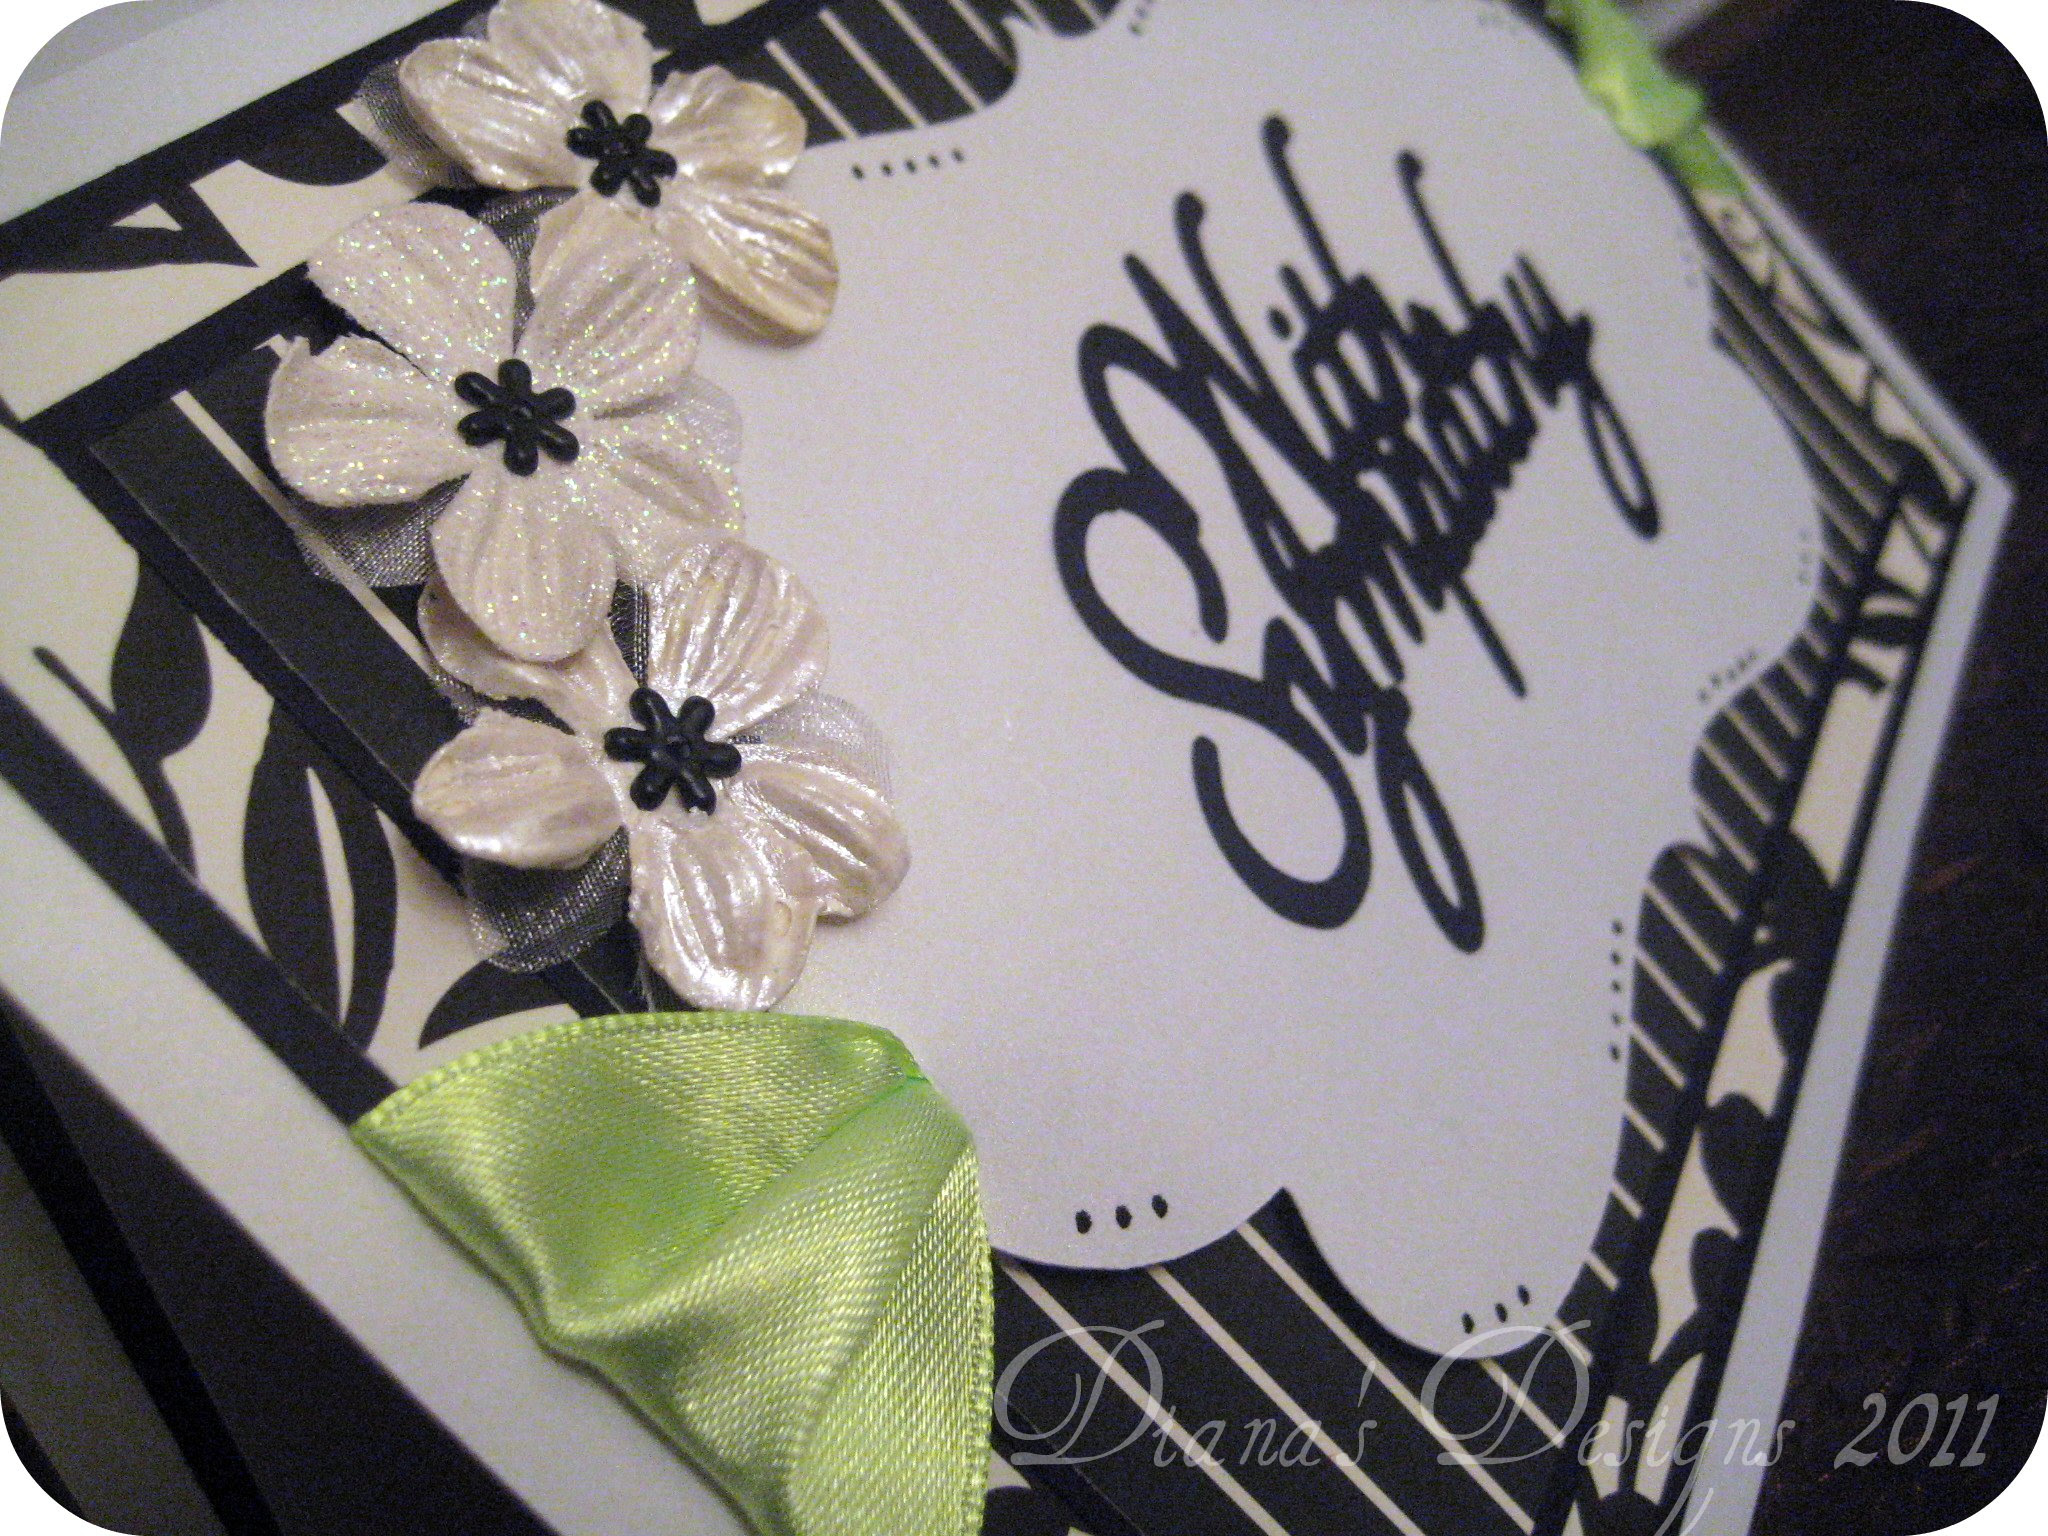 Sympathy Card in Black, White and Green